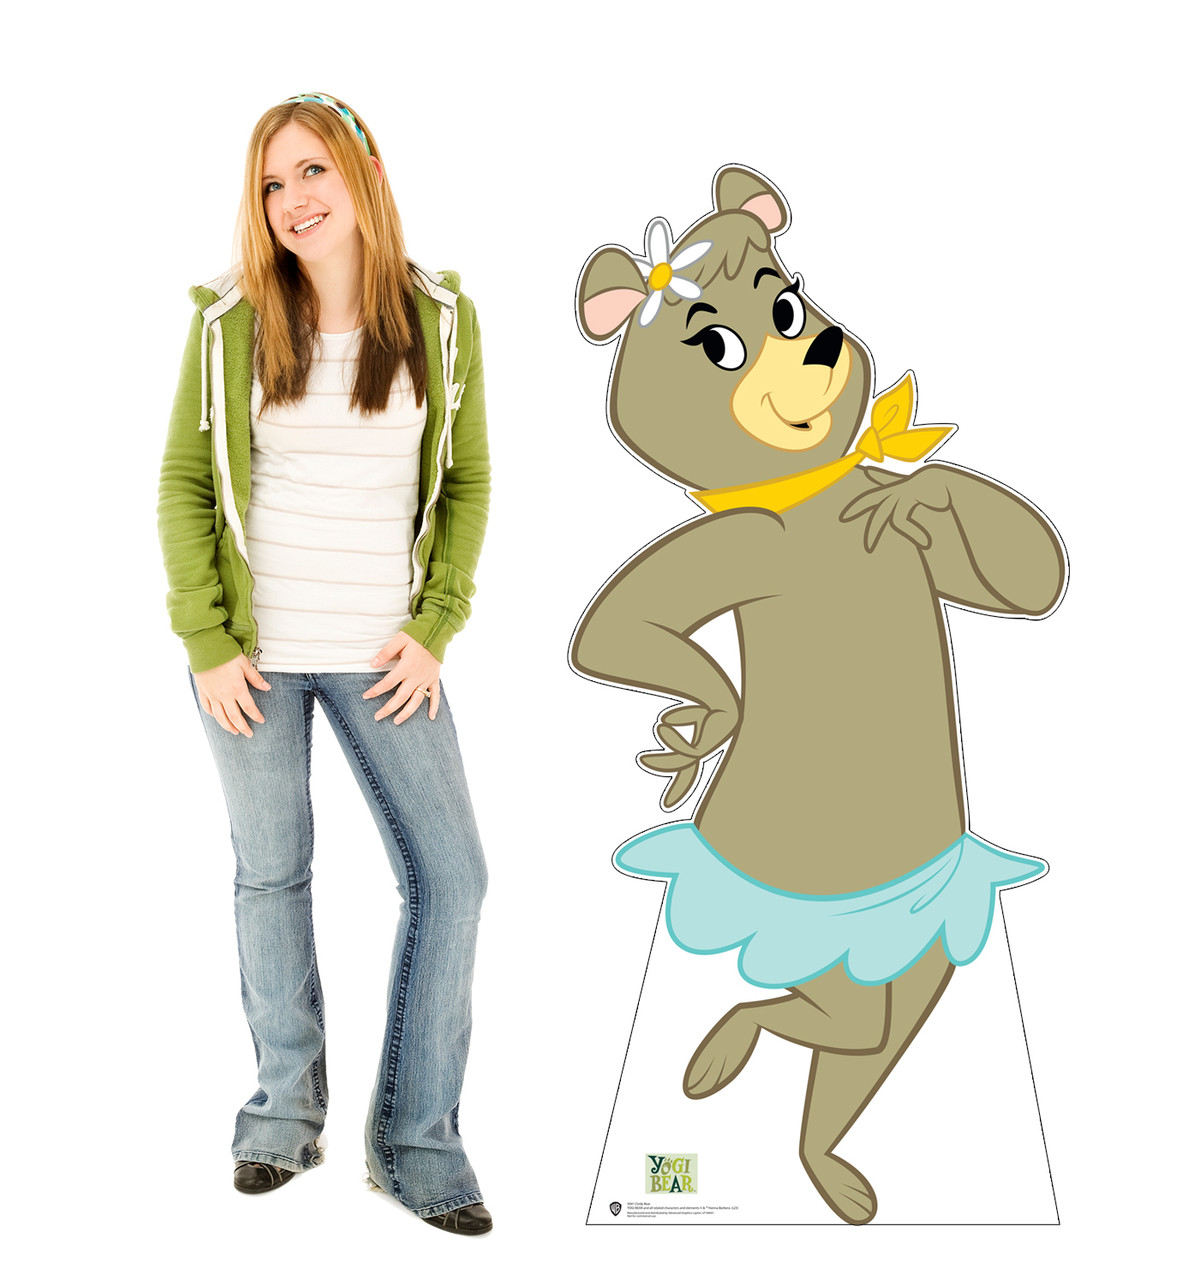 Life-size cardboard standee of Cindy Bear from the Yogi Bear TV series with model.